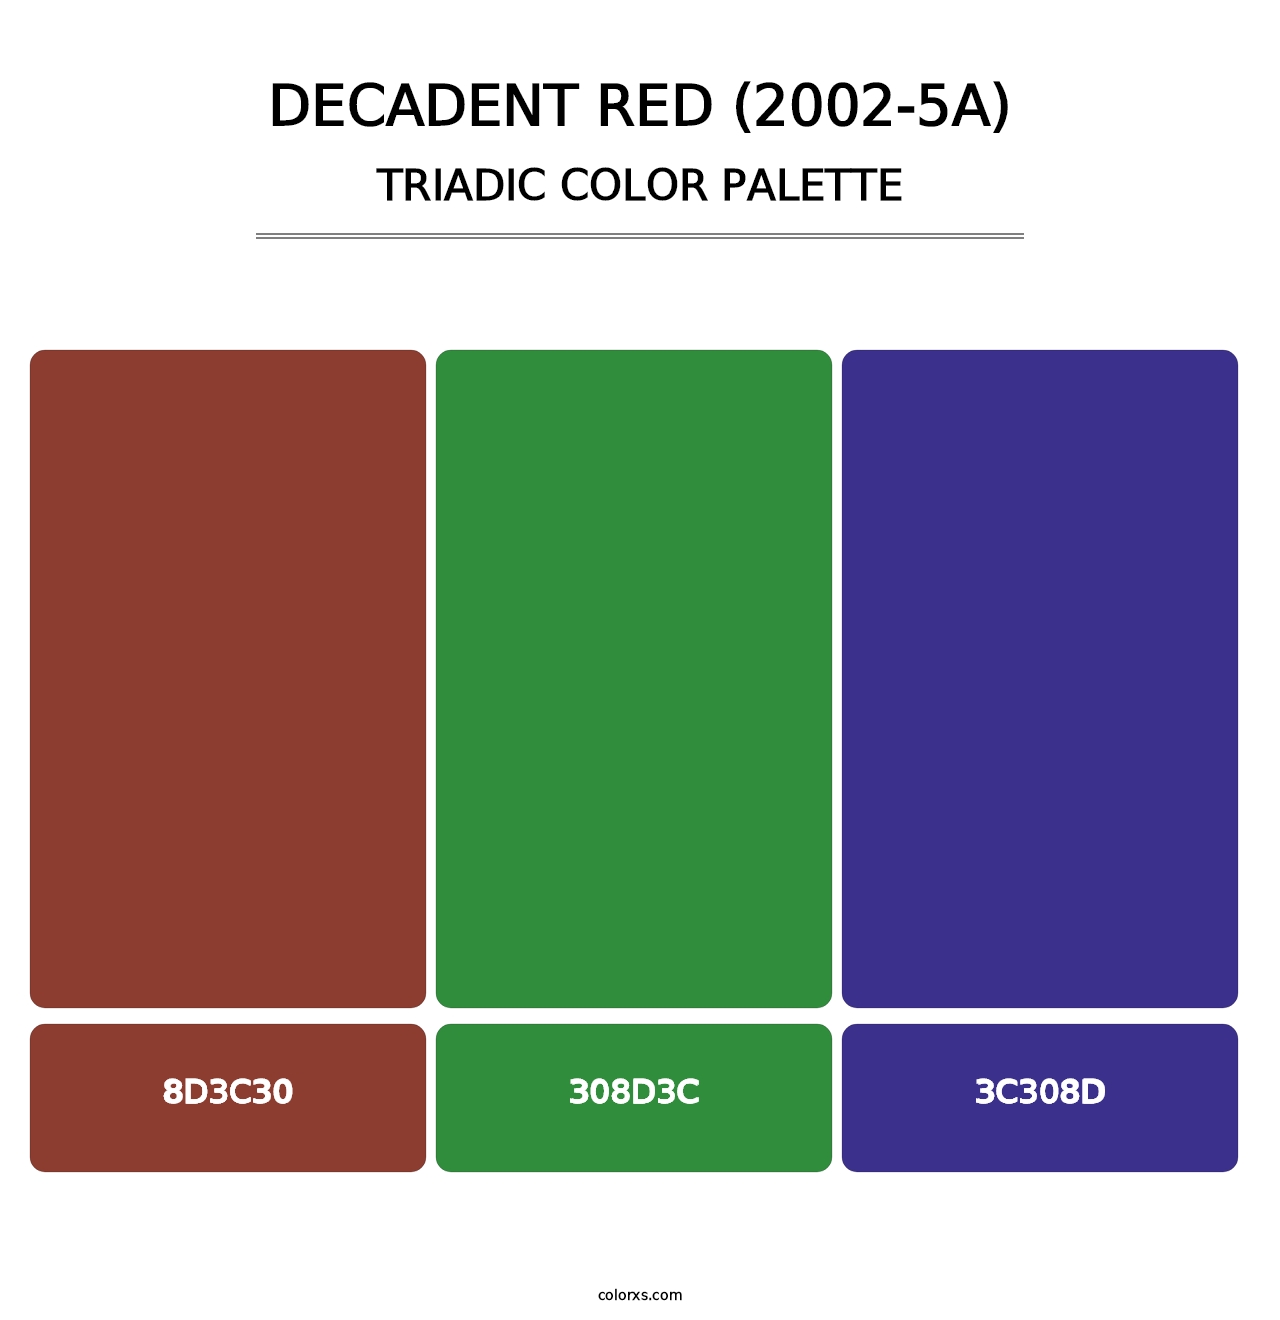 Decadent Red (2002-5A) - Triadic Color Palette